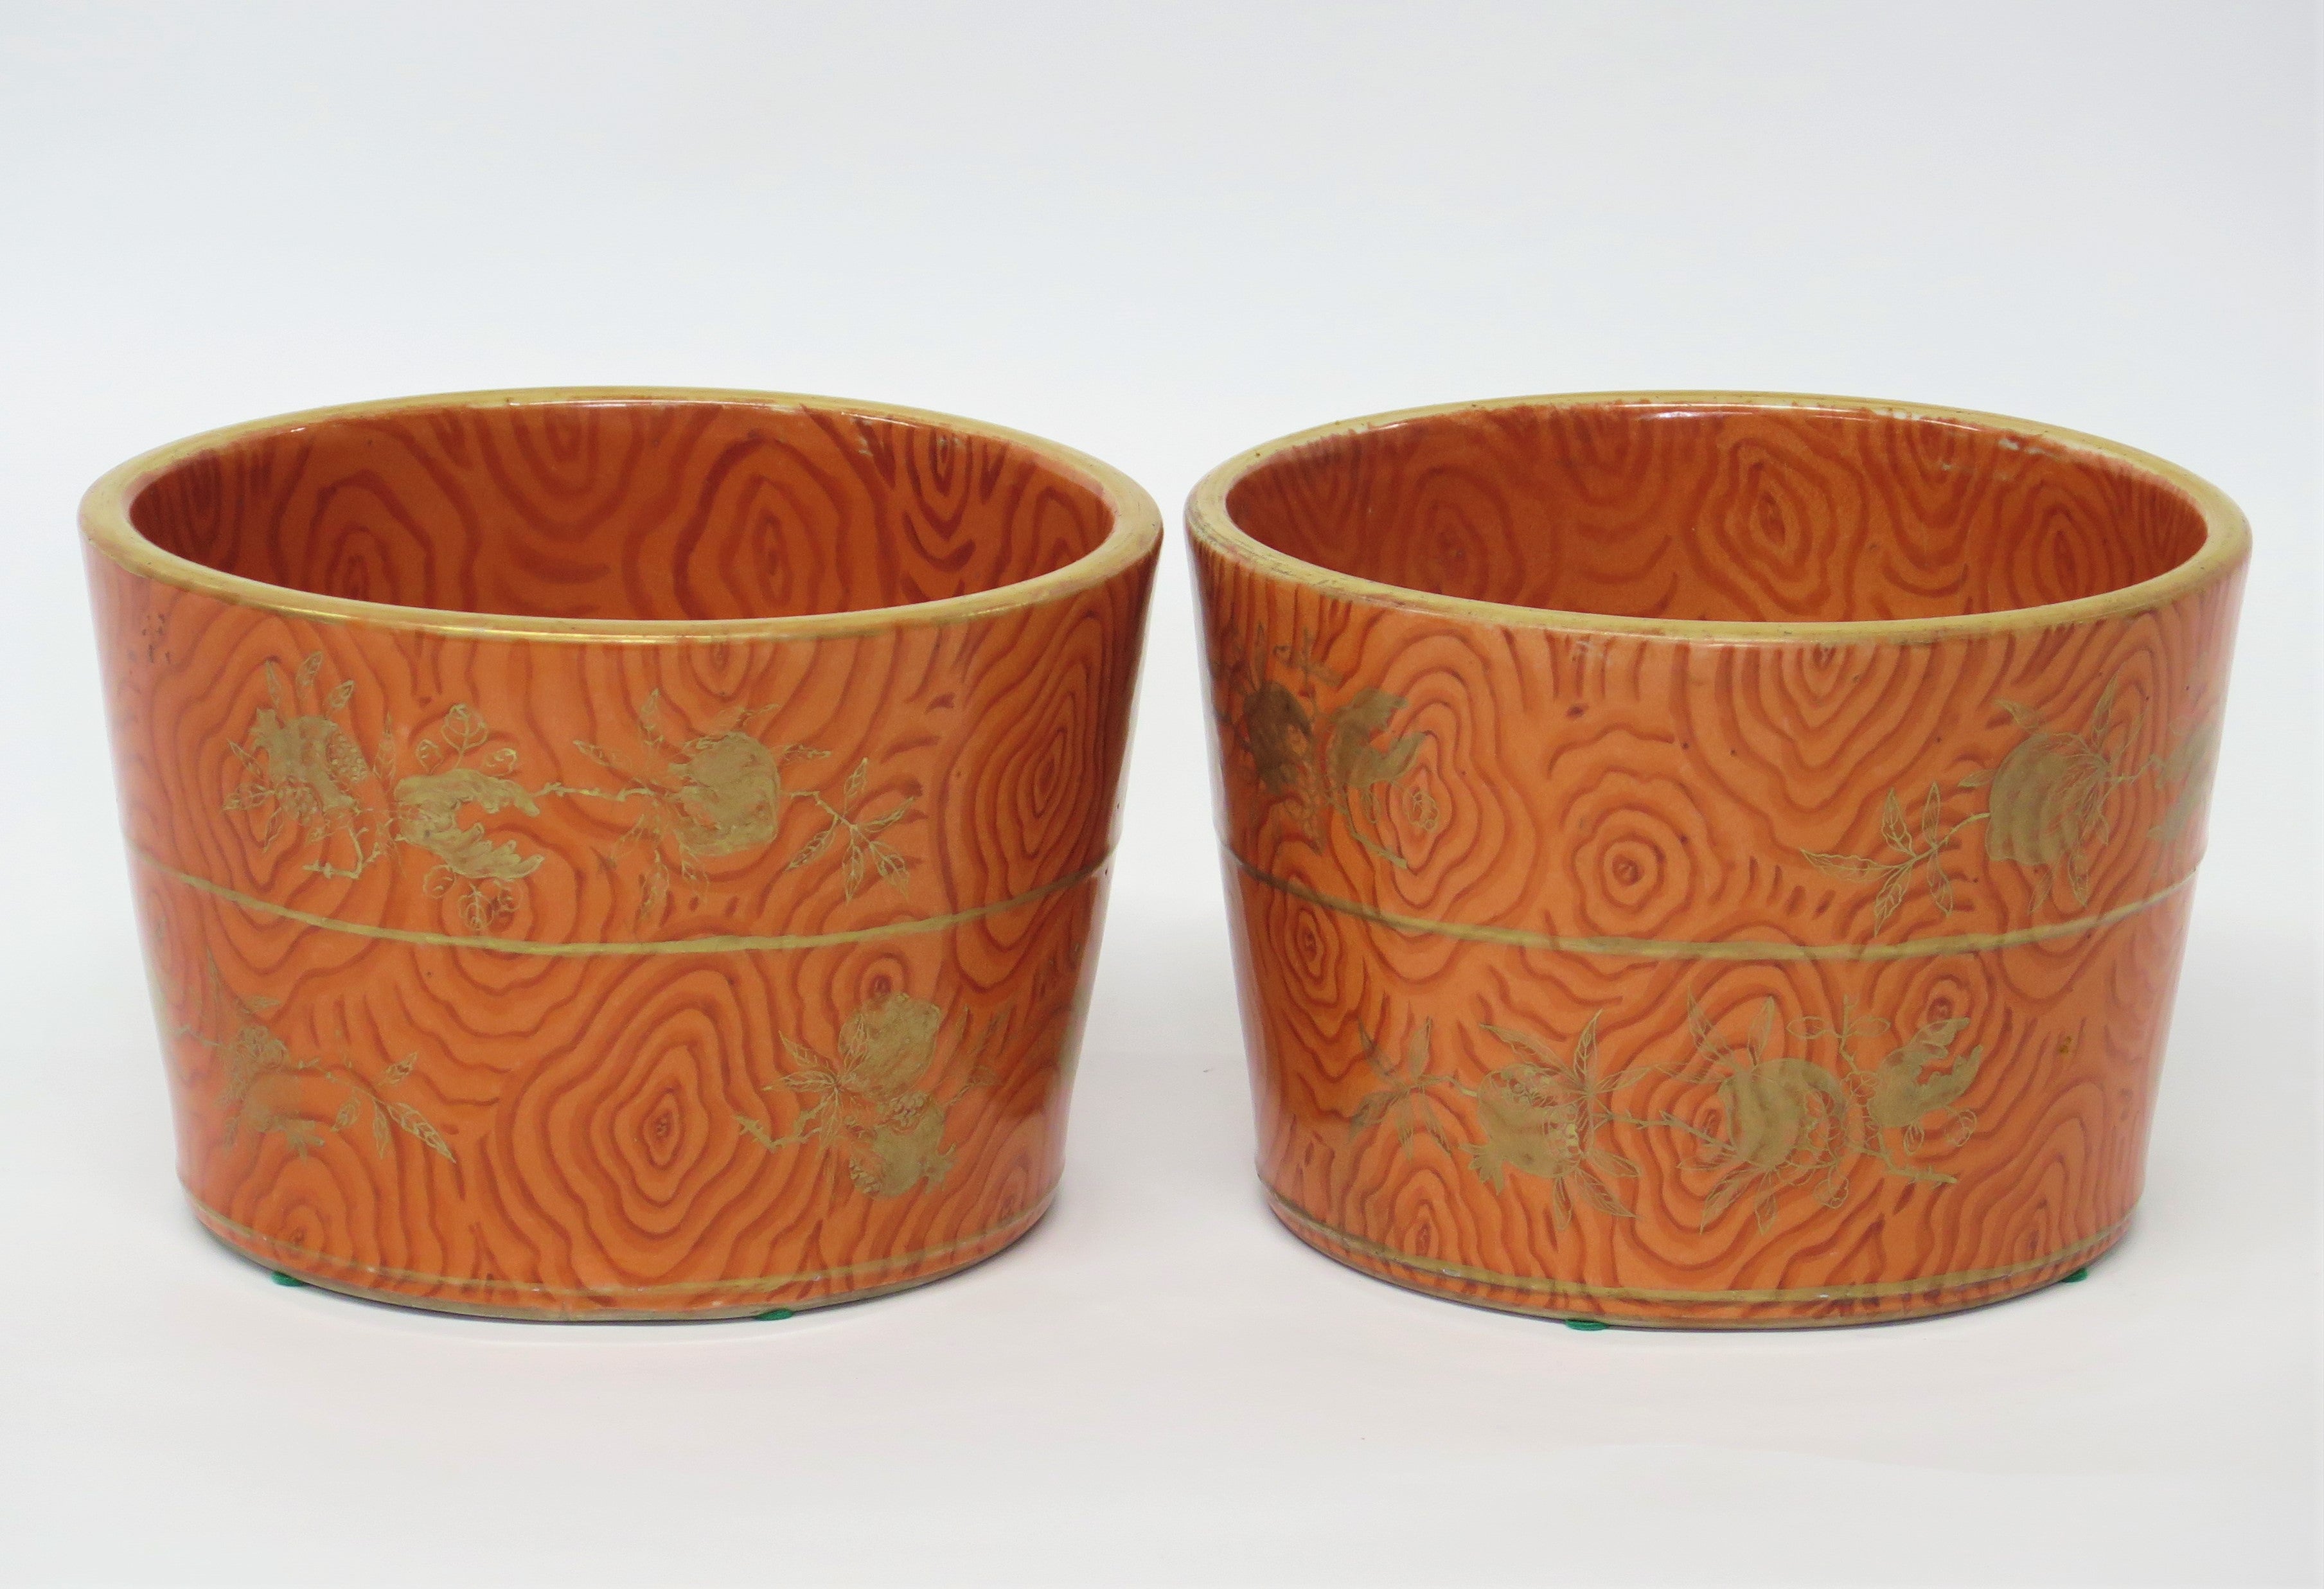 Getty Collection / Pair of Chinese Iron-Red and Gilt ''Faux Bois'' Jardineres